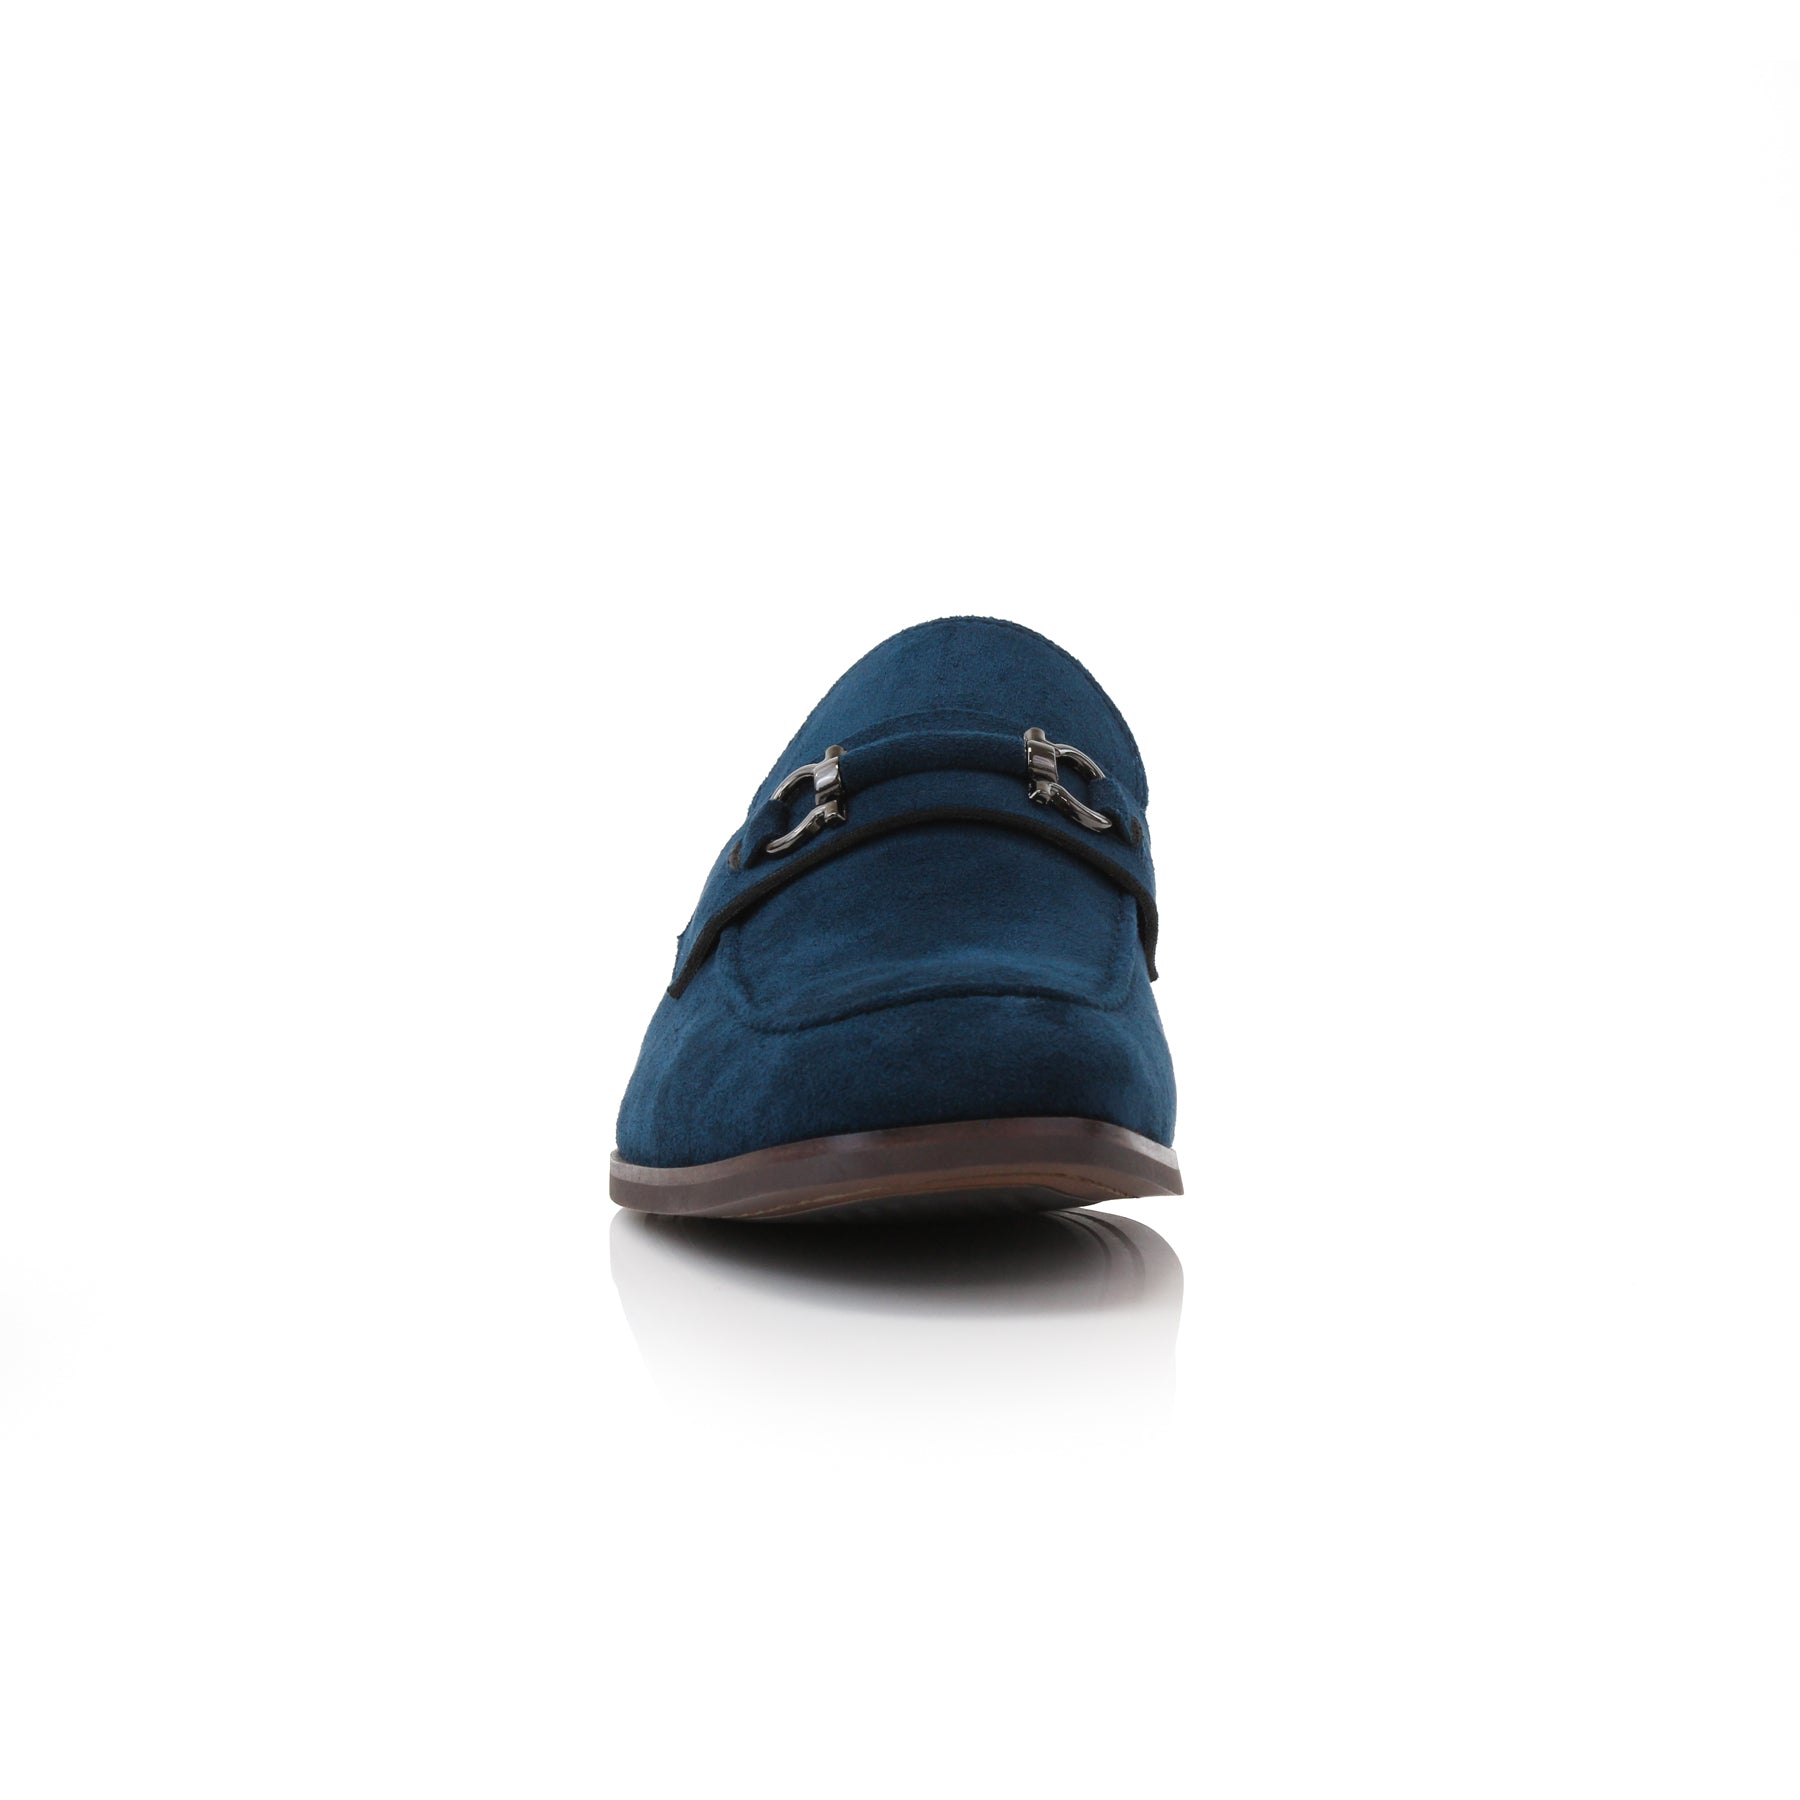 Metal Buckle Suede Loafers | Demitri by Ferro Aldo | Conal Footwear | Front Angle View